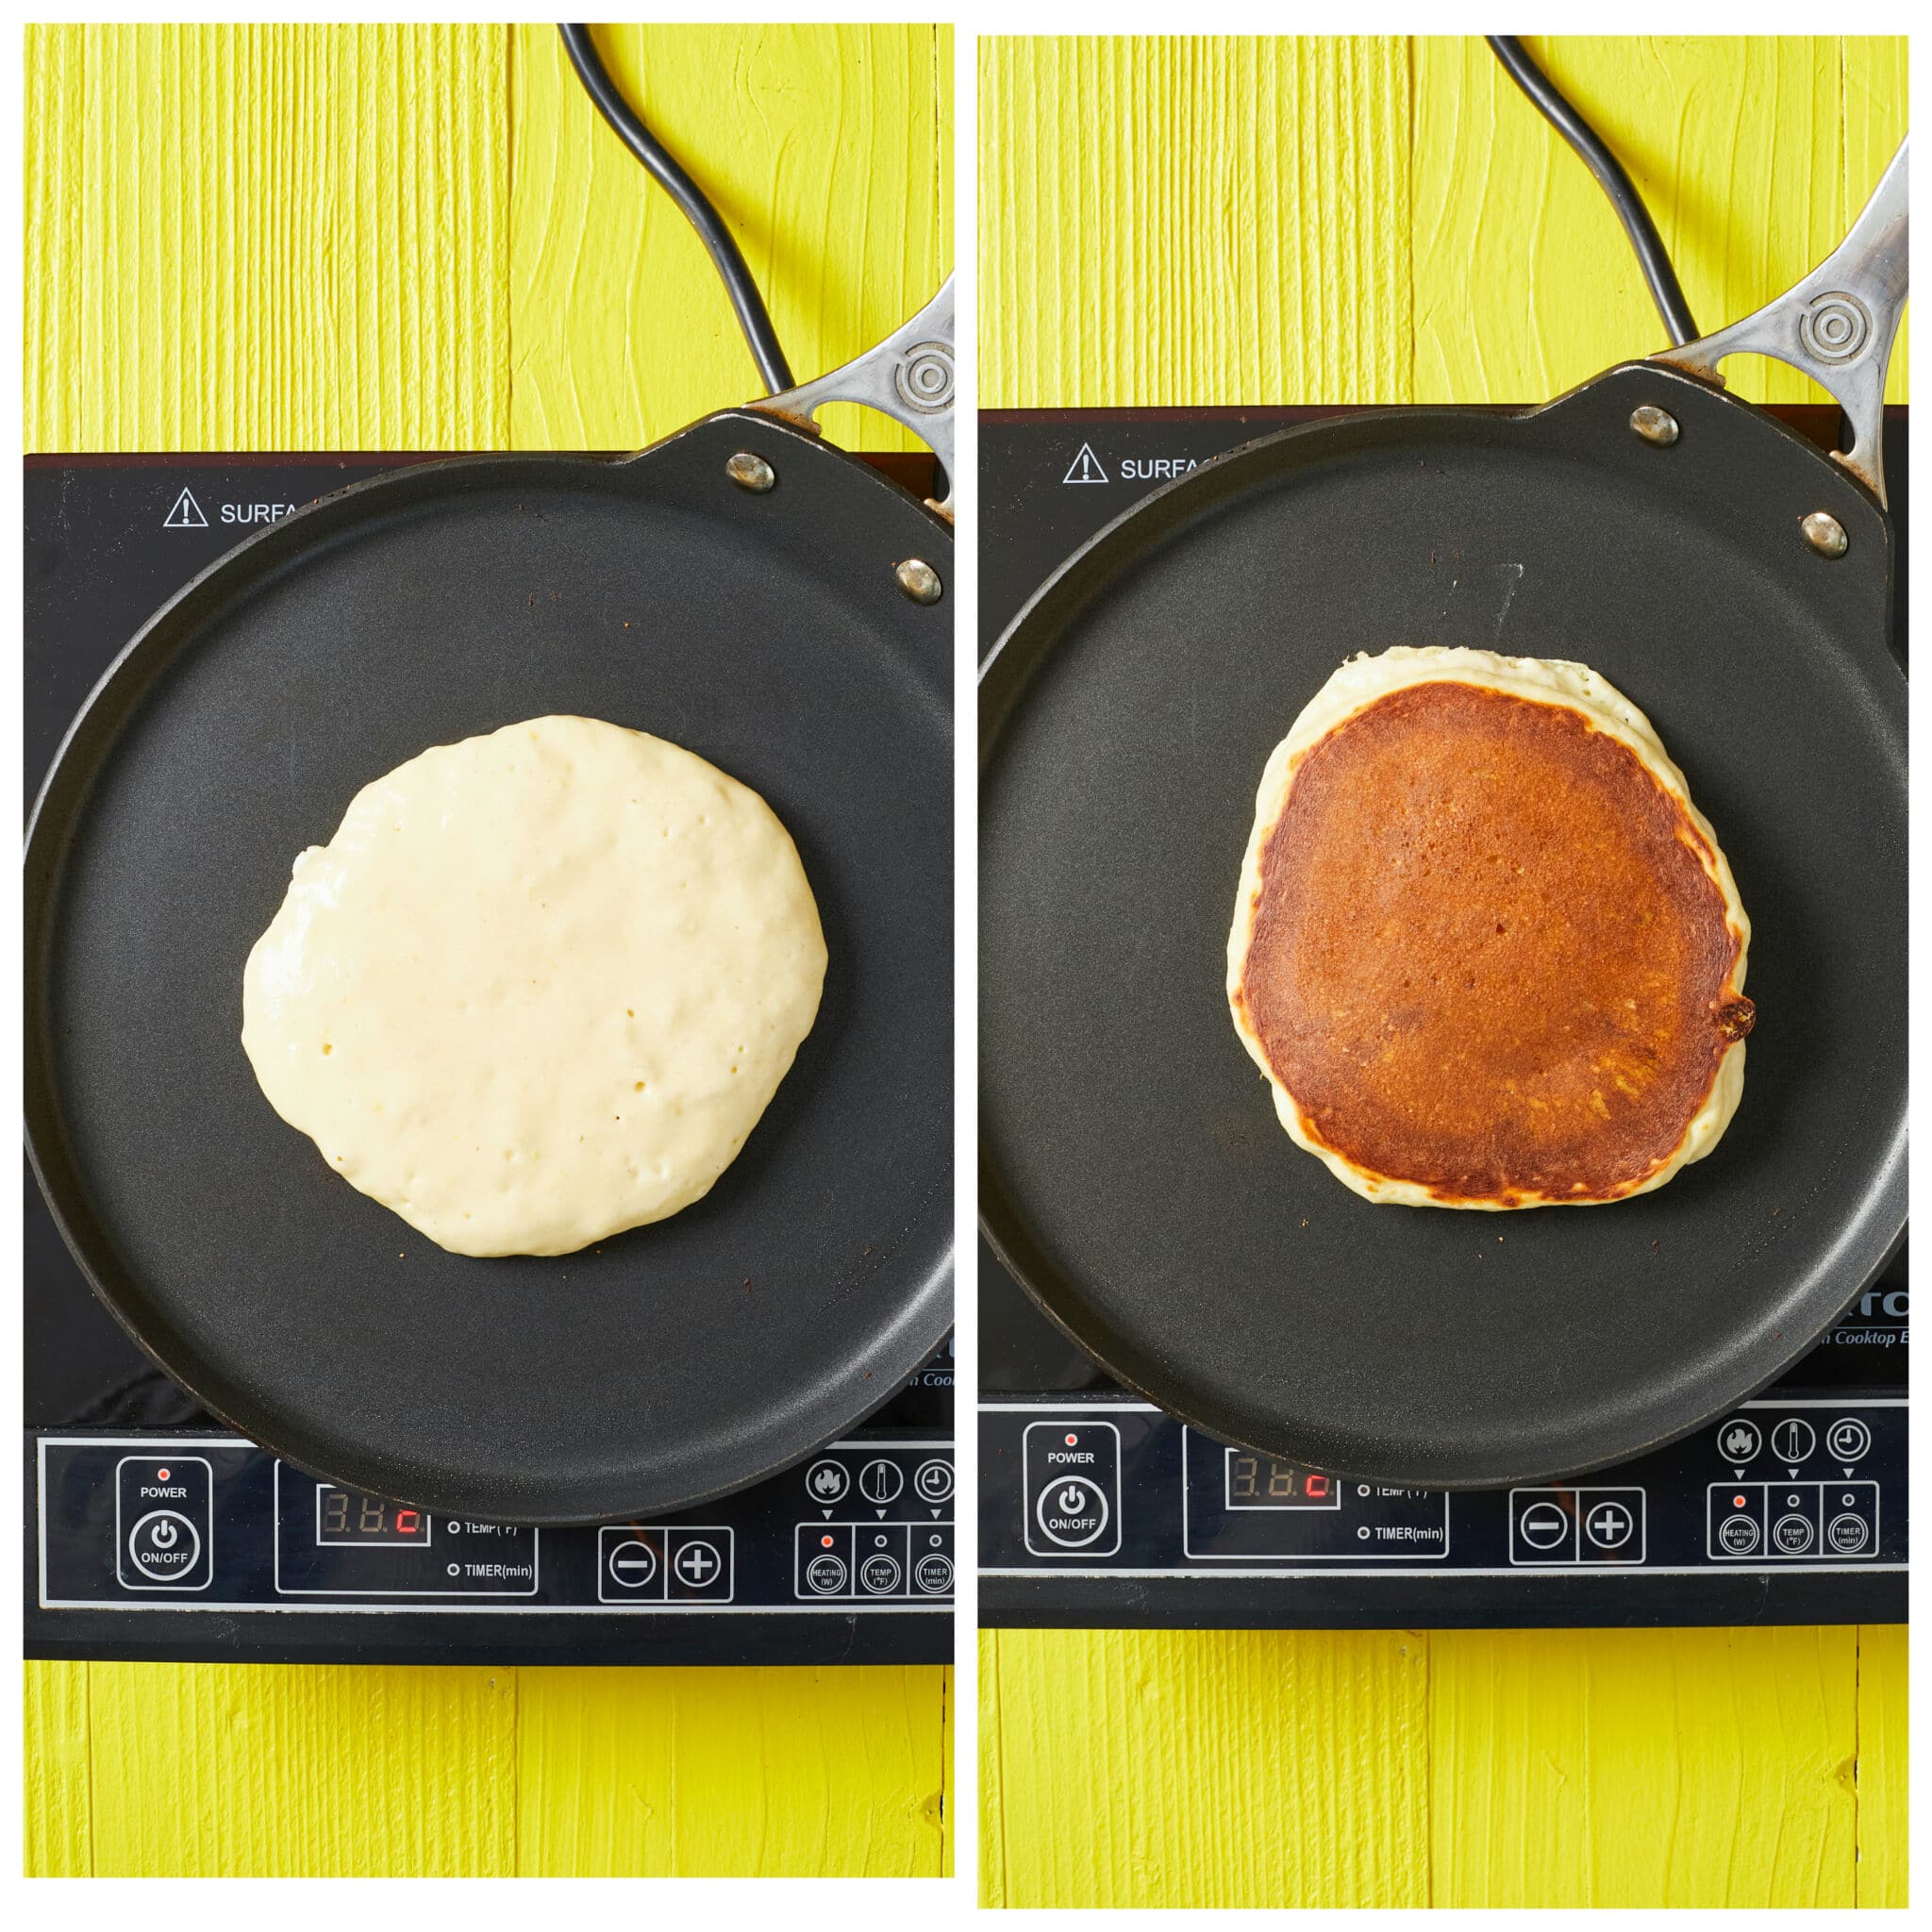 Instructions for cooking Lemon Ricotta Pancakes. On the left, cook pancakes in the center of the pan at medium-low heat until bubbles from on top and edges area lightly golden and crispy before flipping. Cook the other side until lightly golden brown.